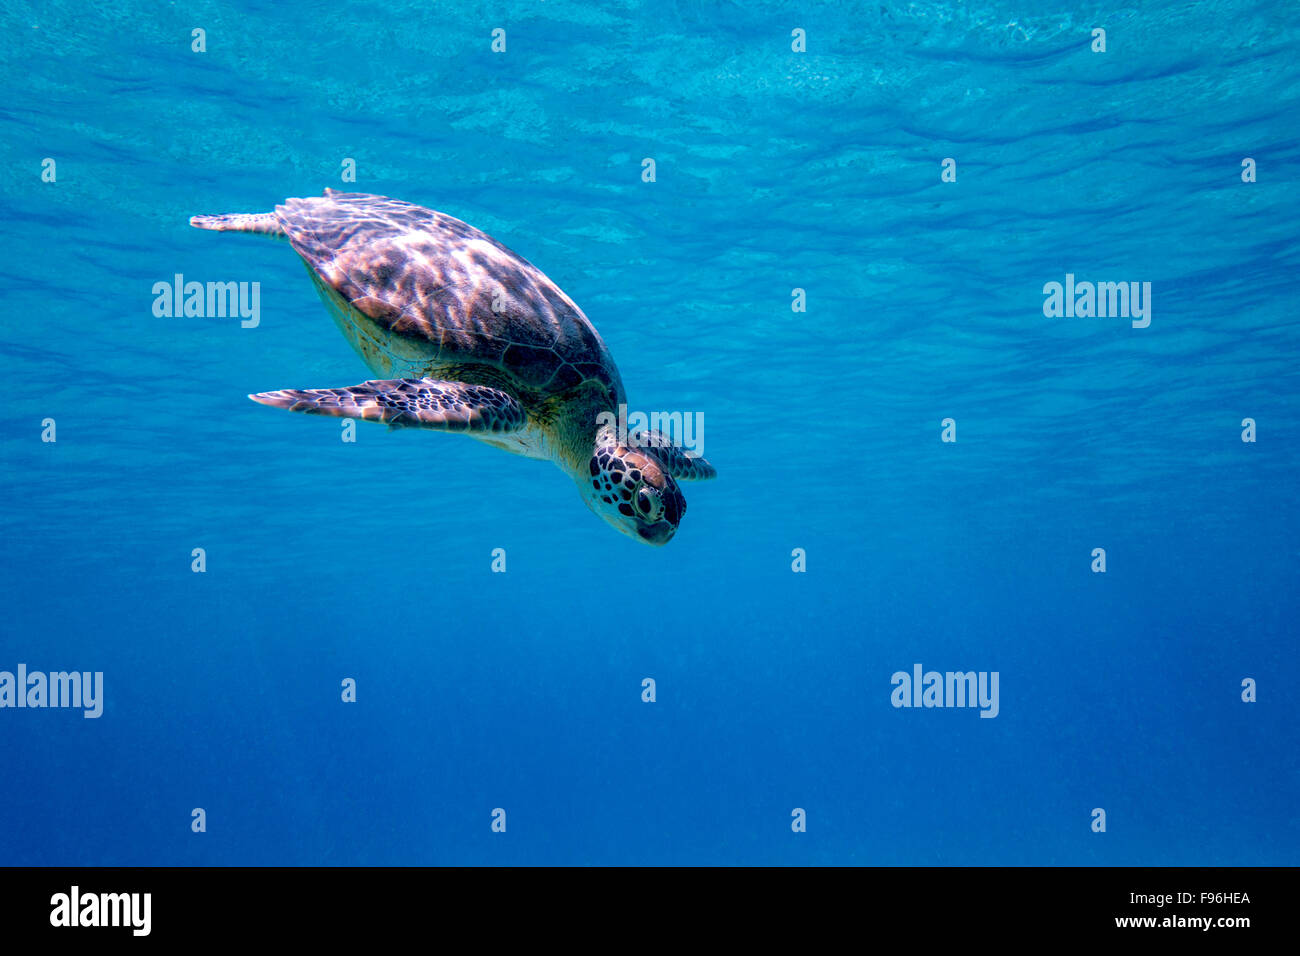 A Green sea turtle swimming in the blue waters of Bonaire in the Caribbean Stock Photo